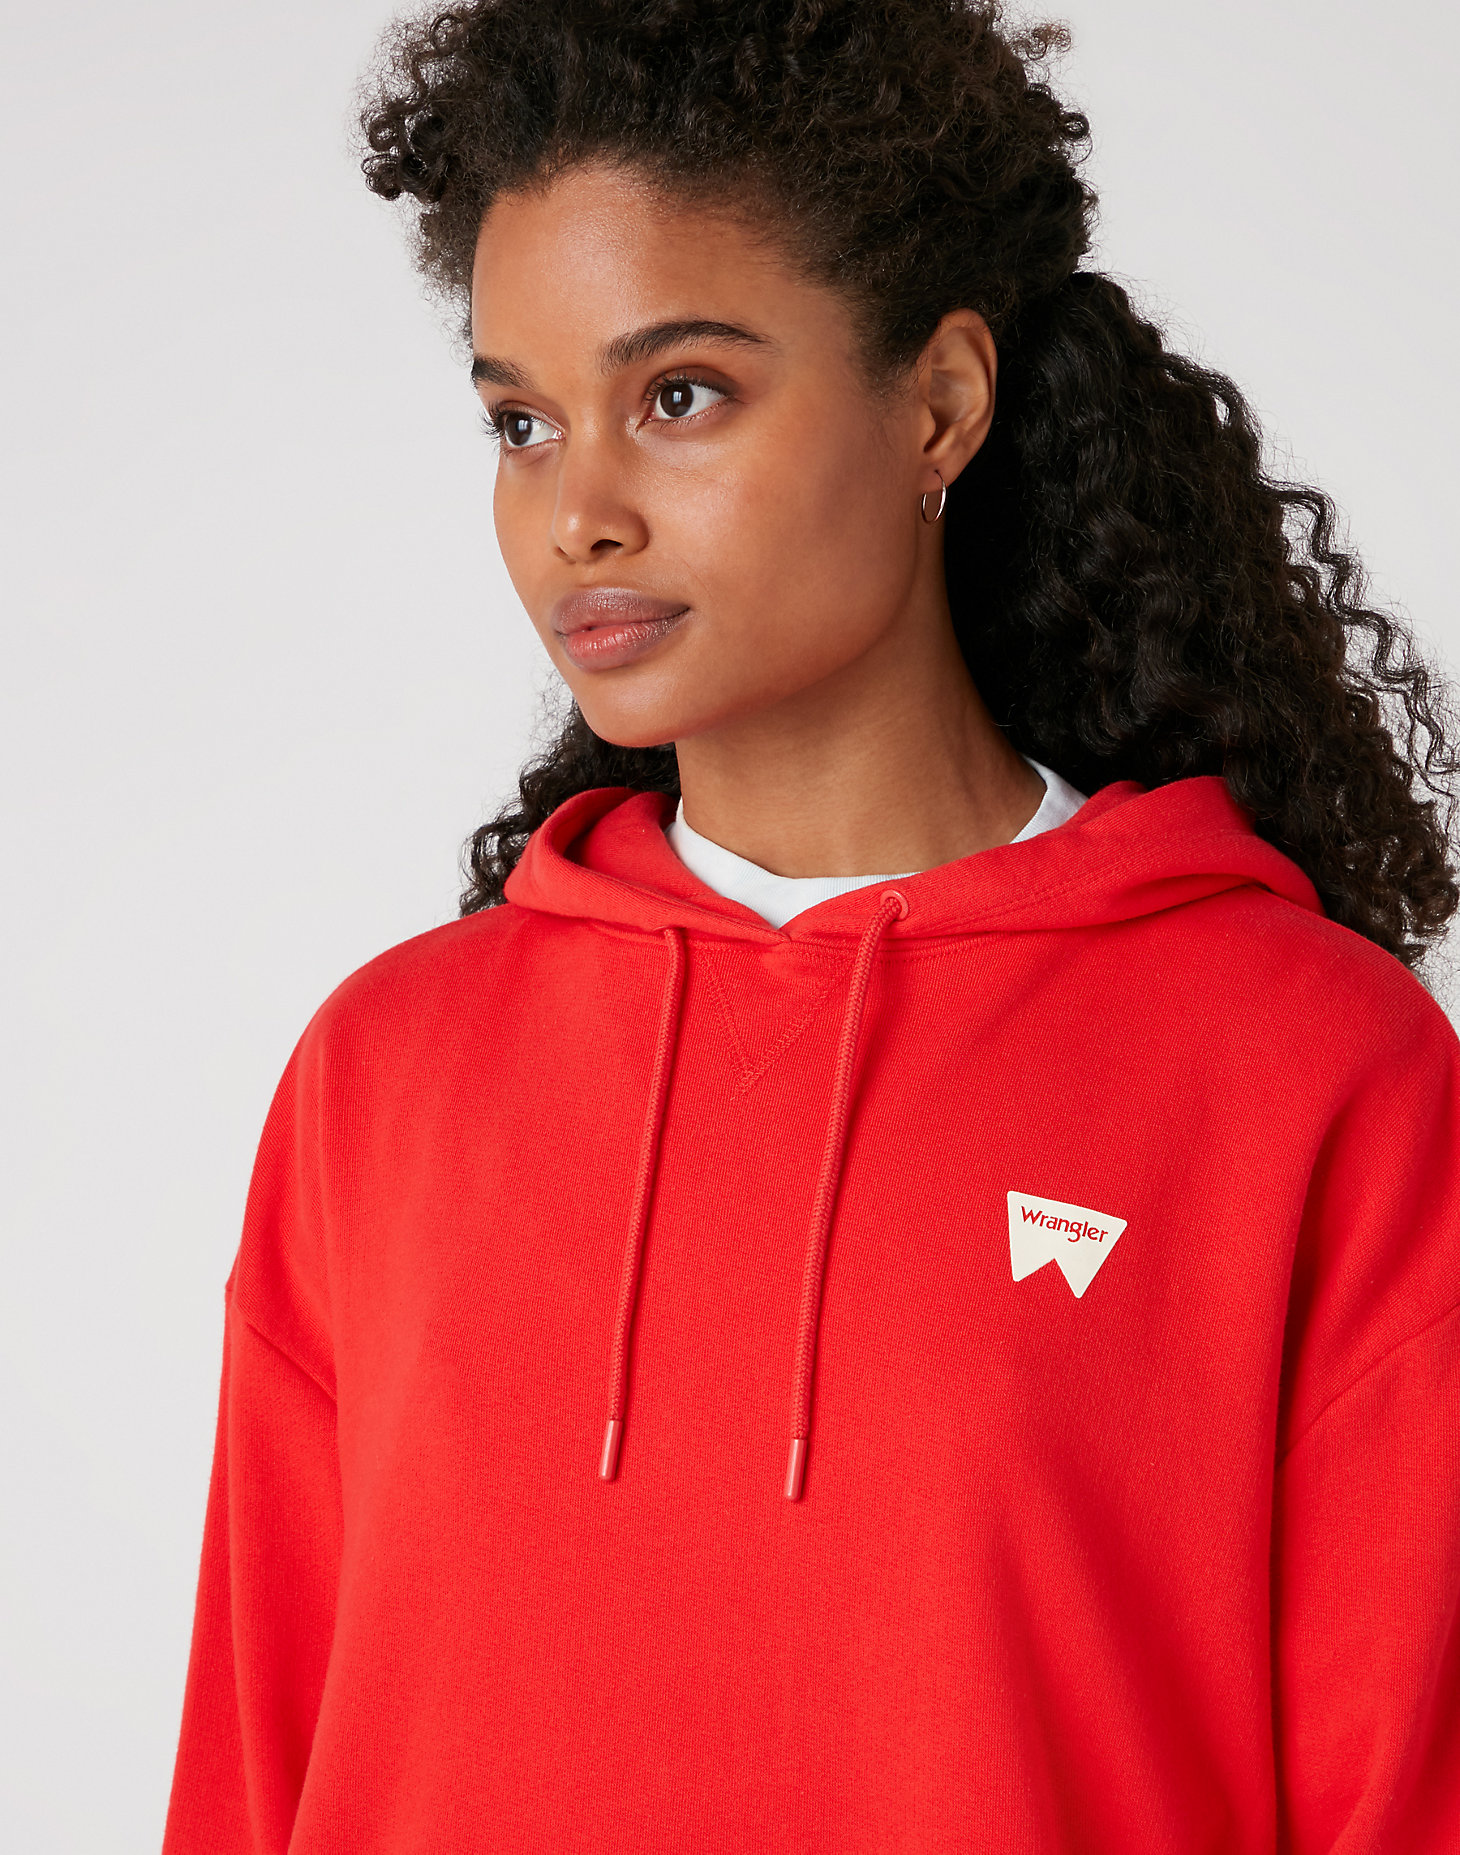 Drawcord Hoody in Flame Red alternative view 3